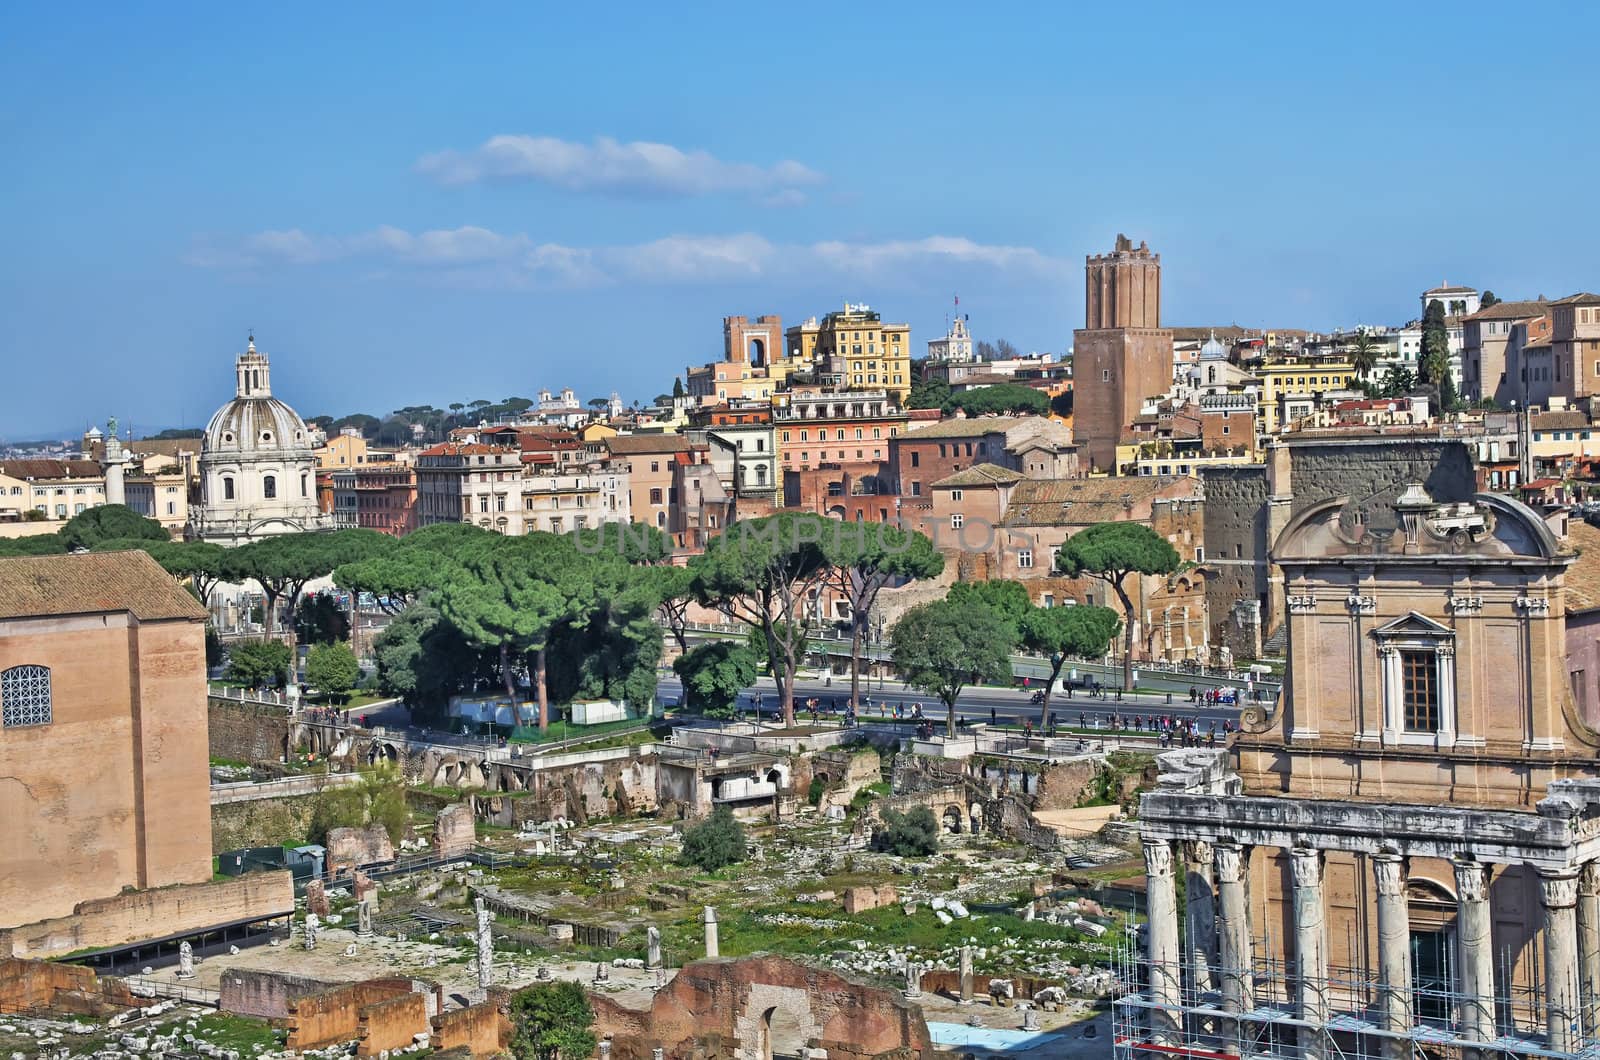 Roman forum background in Rome, view from Palatine hill